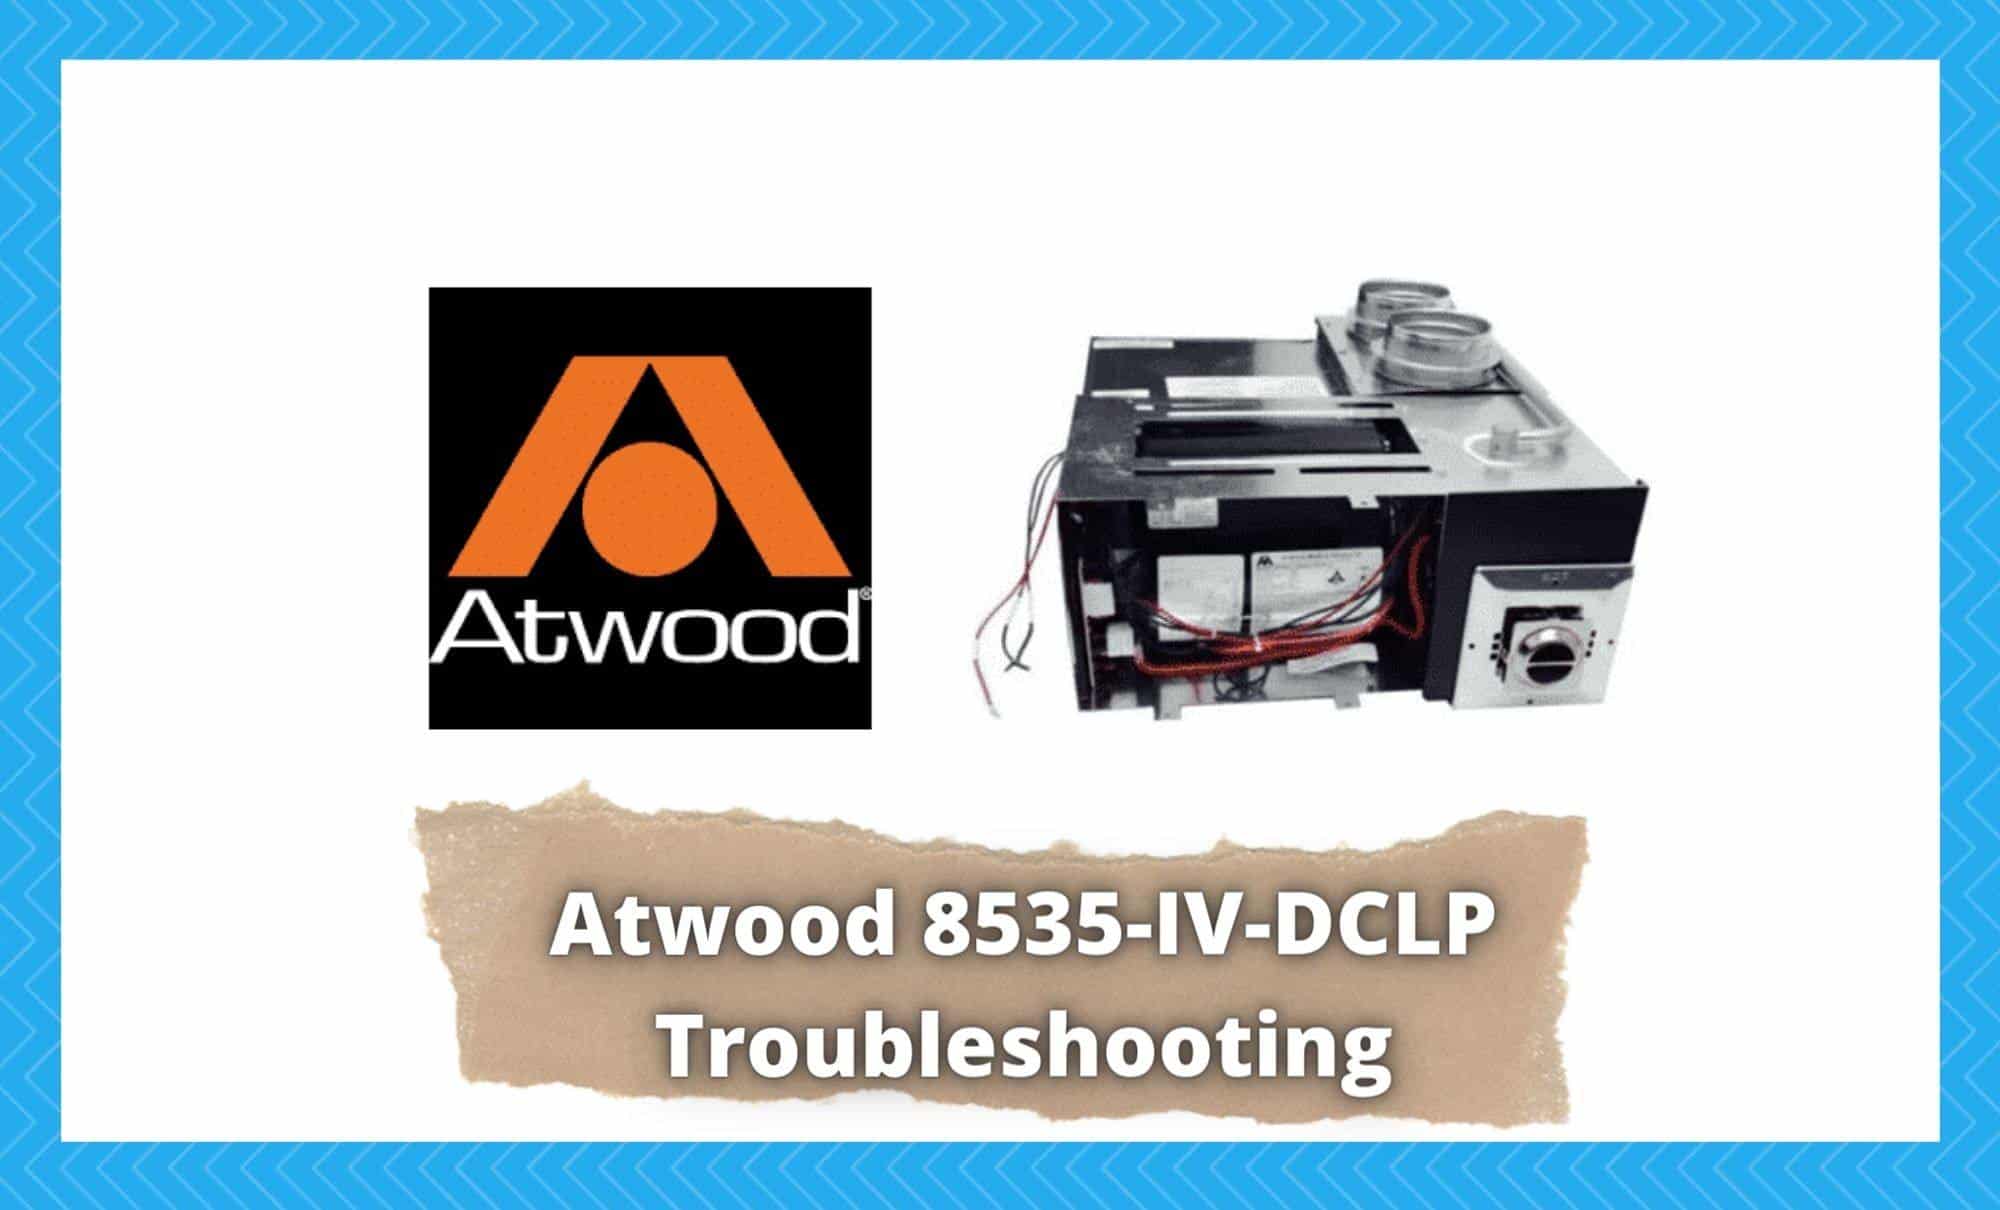 atwood 8535-iv-dclp troubleshooting